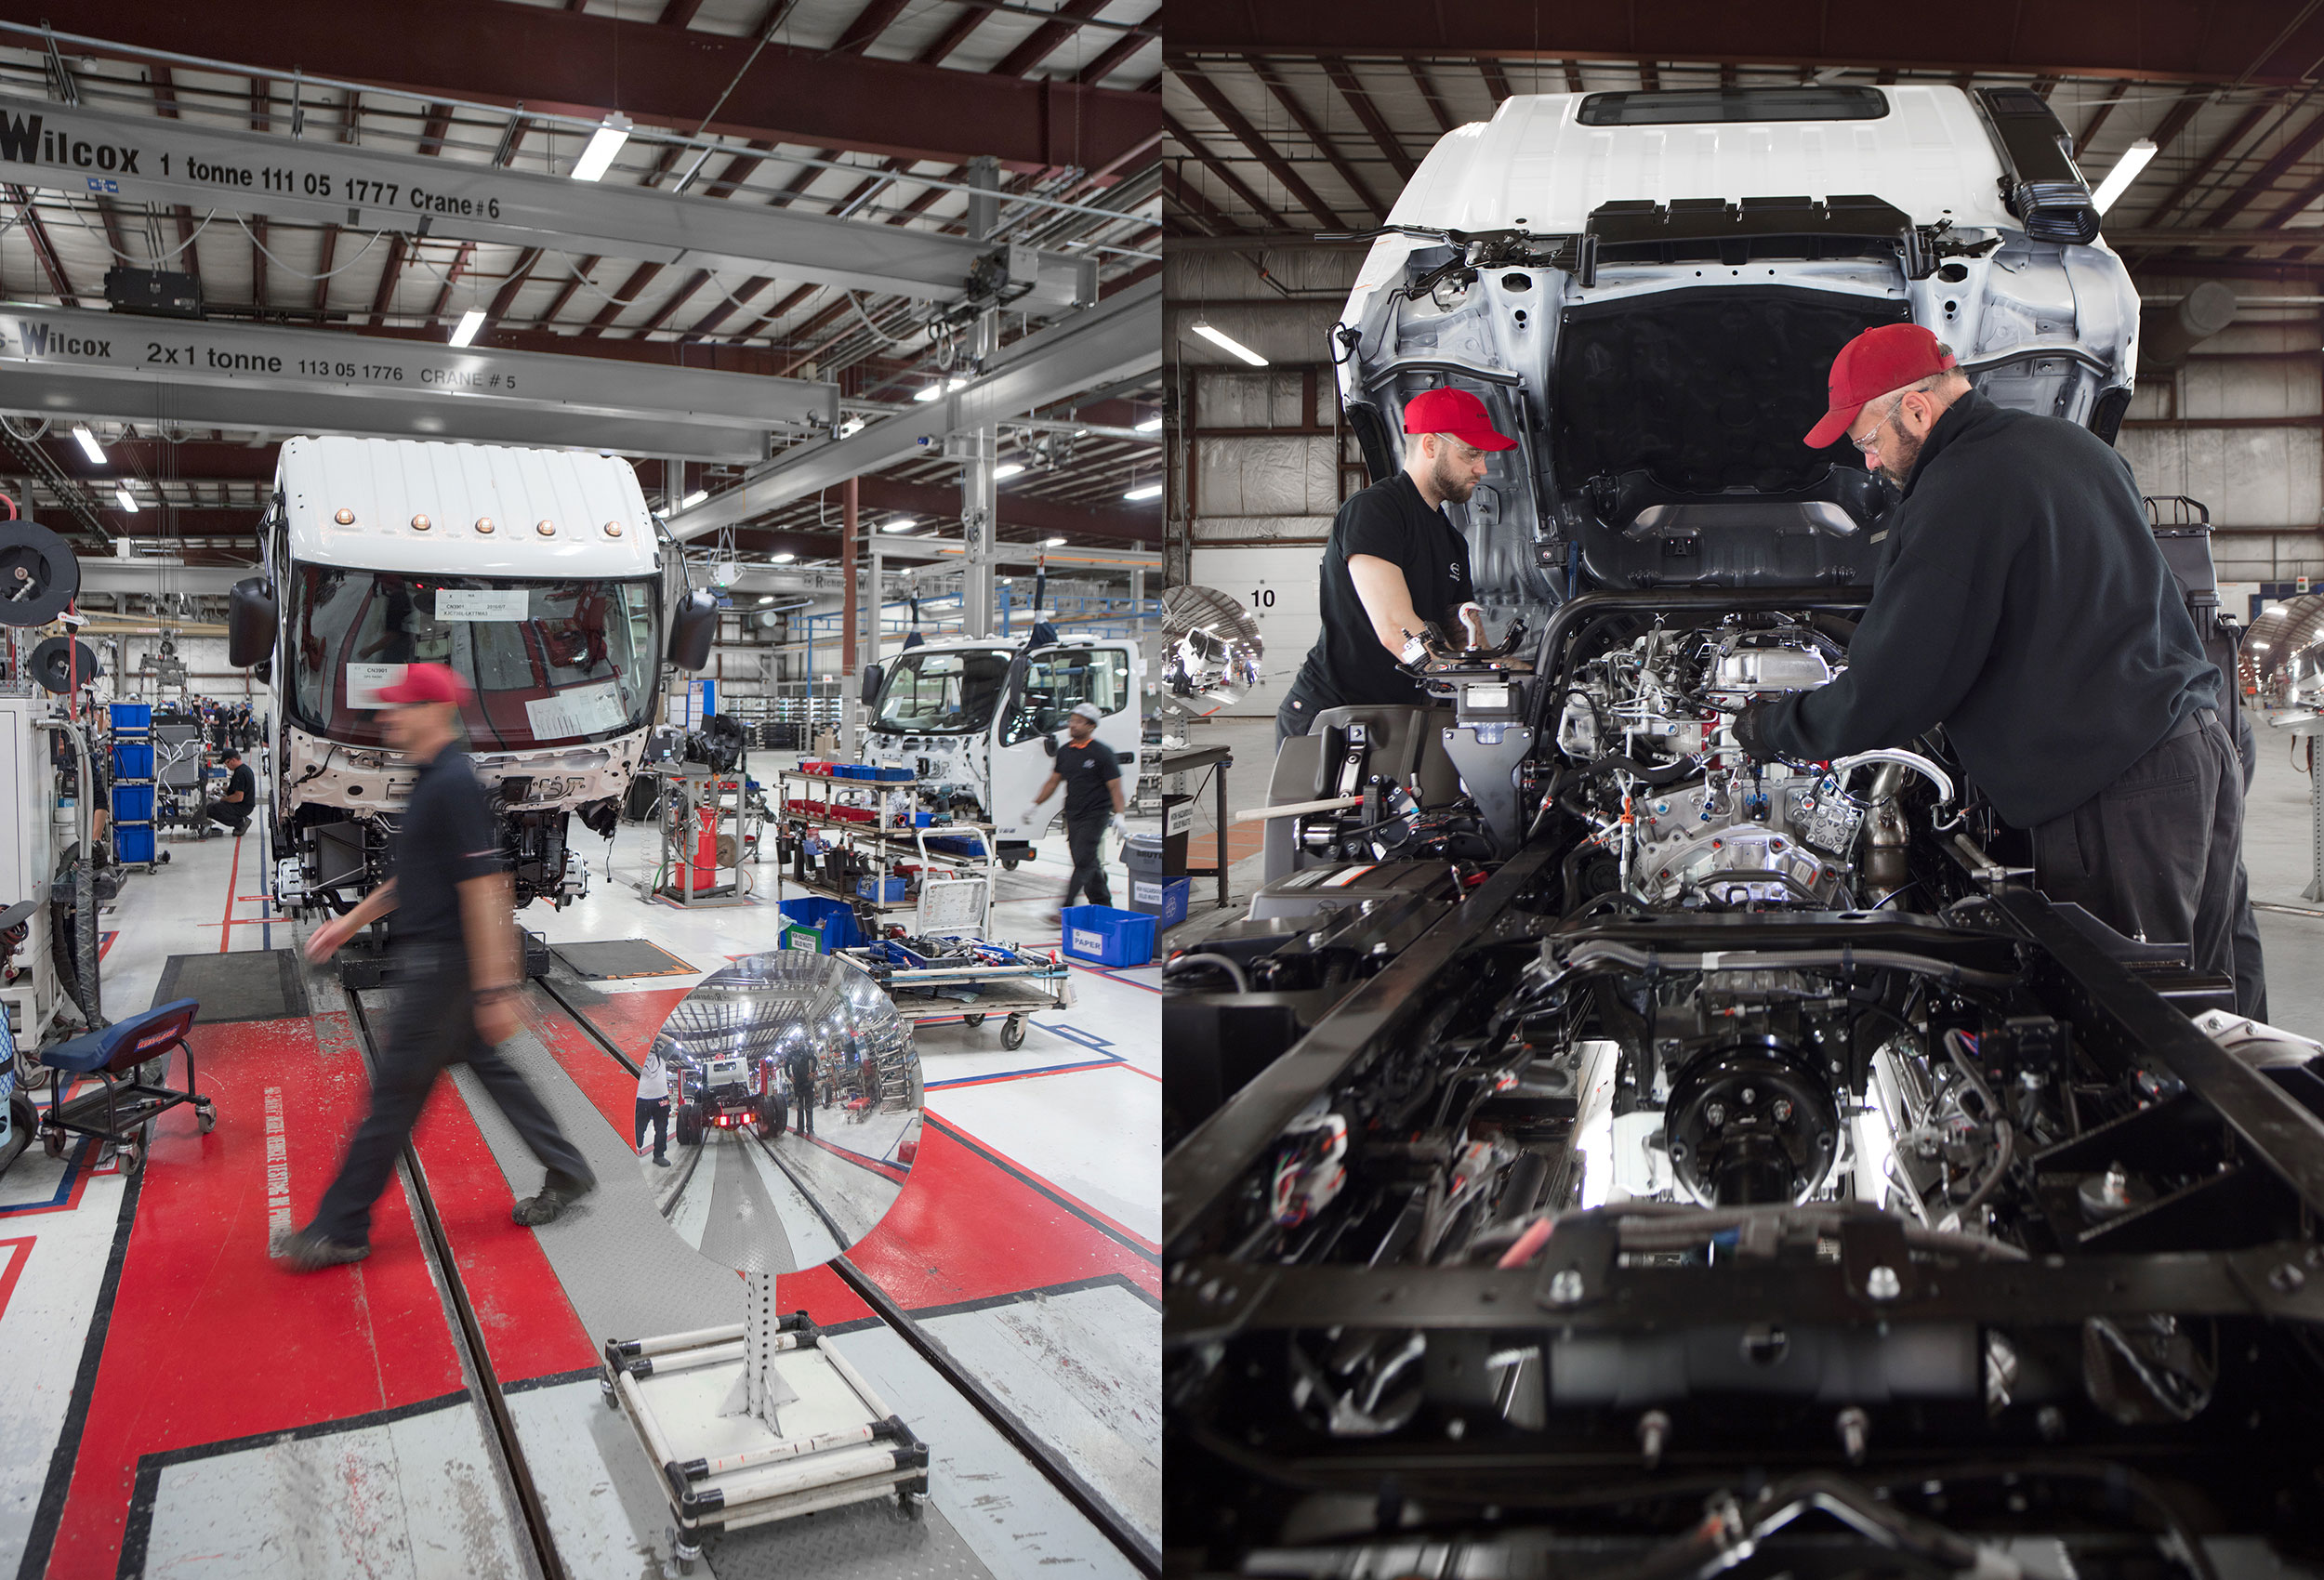 hino truck employees manufactur the m series truck at the woodstock ontario plant